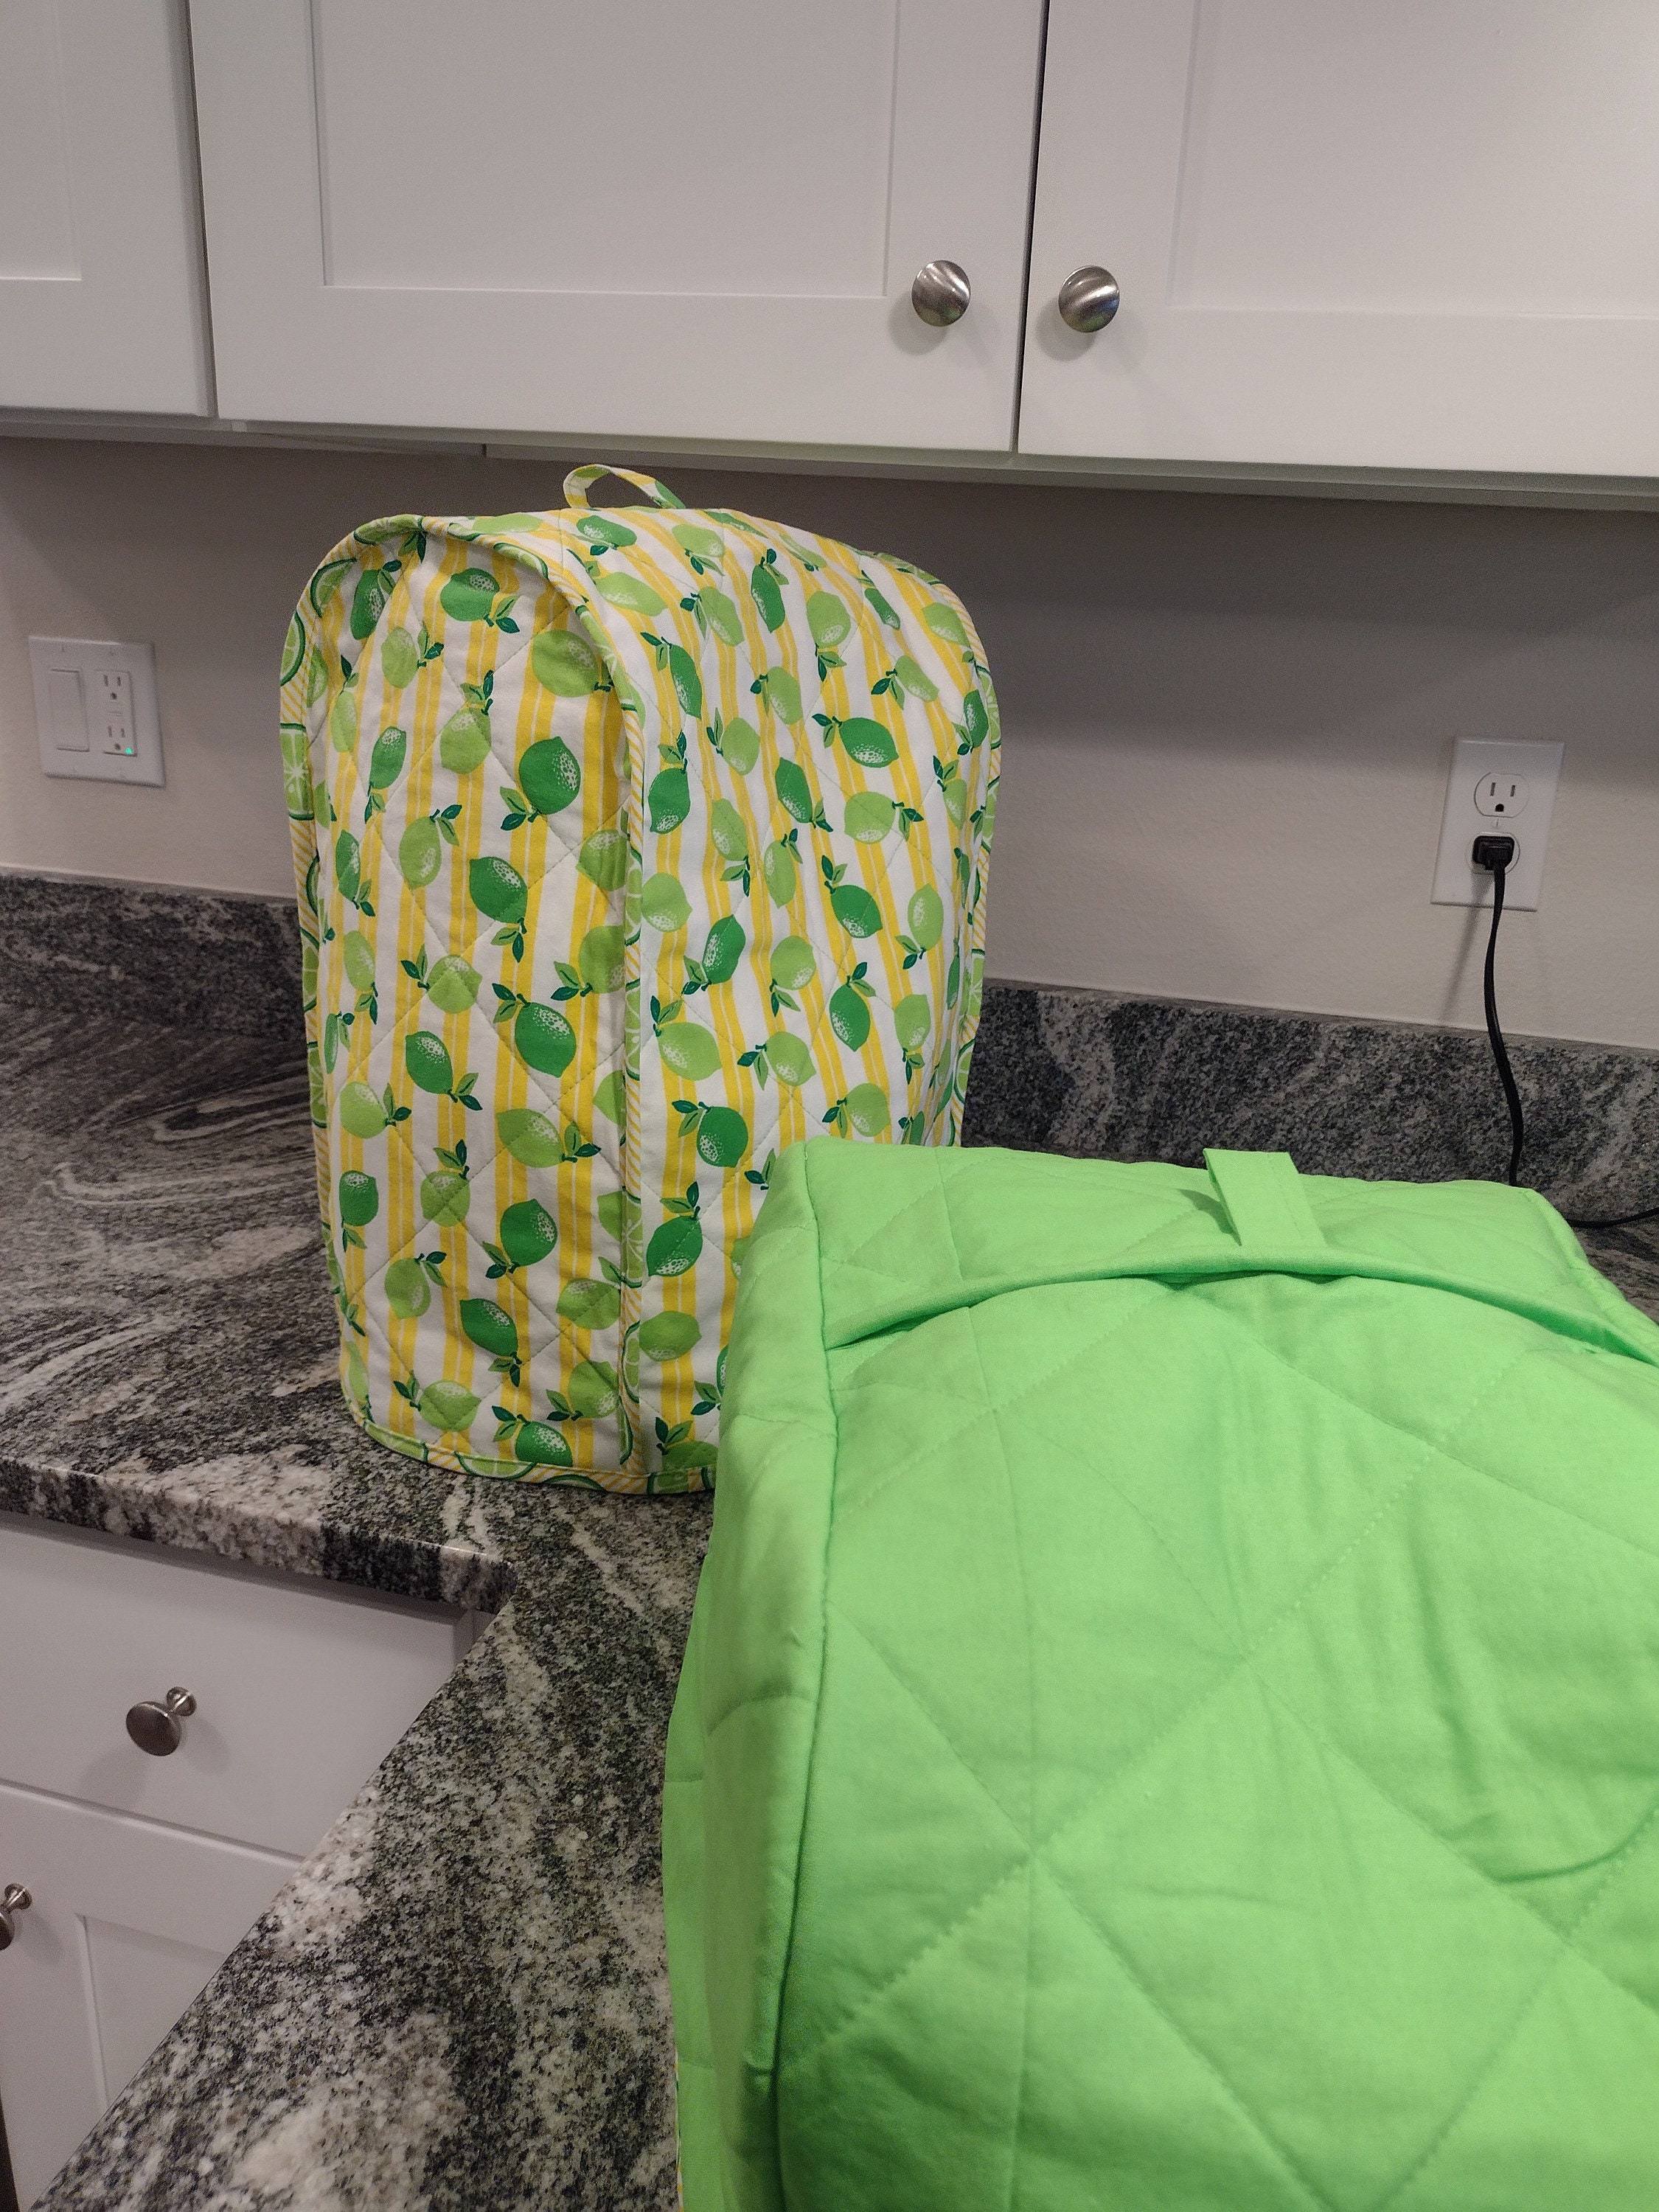 Lime Green Toaster Cover, 4 Slice, Quilted/reversible, Handmade, Washable,  Unique, Appliance Covers, Kitchen Accessories, Matched Set 